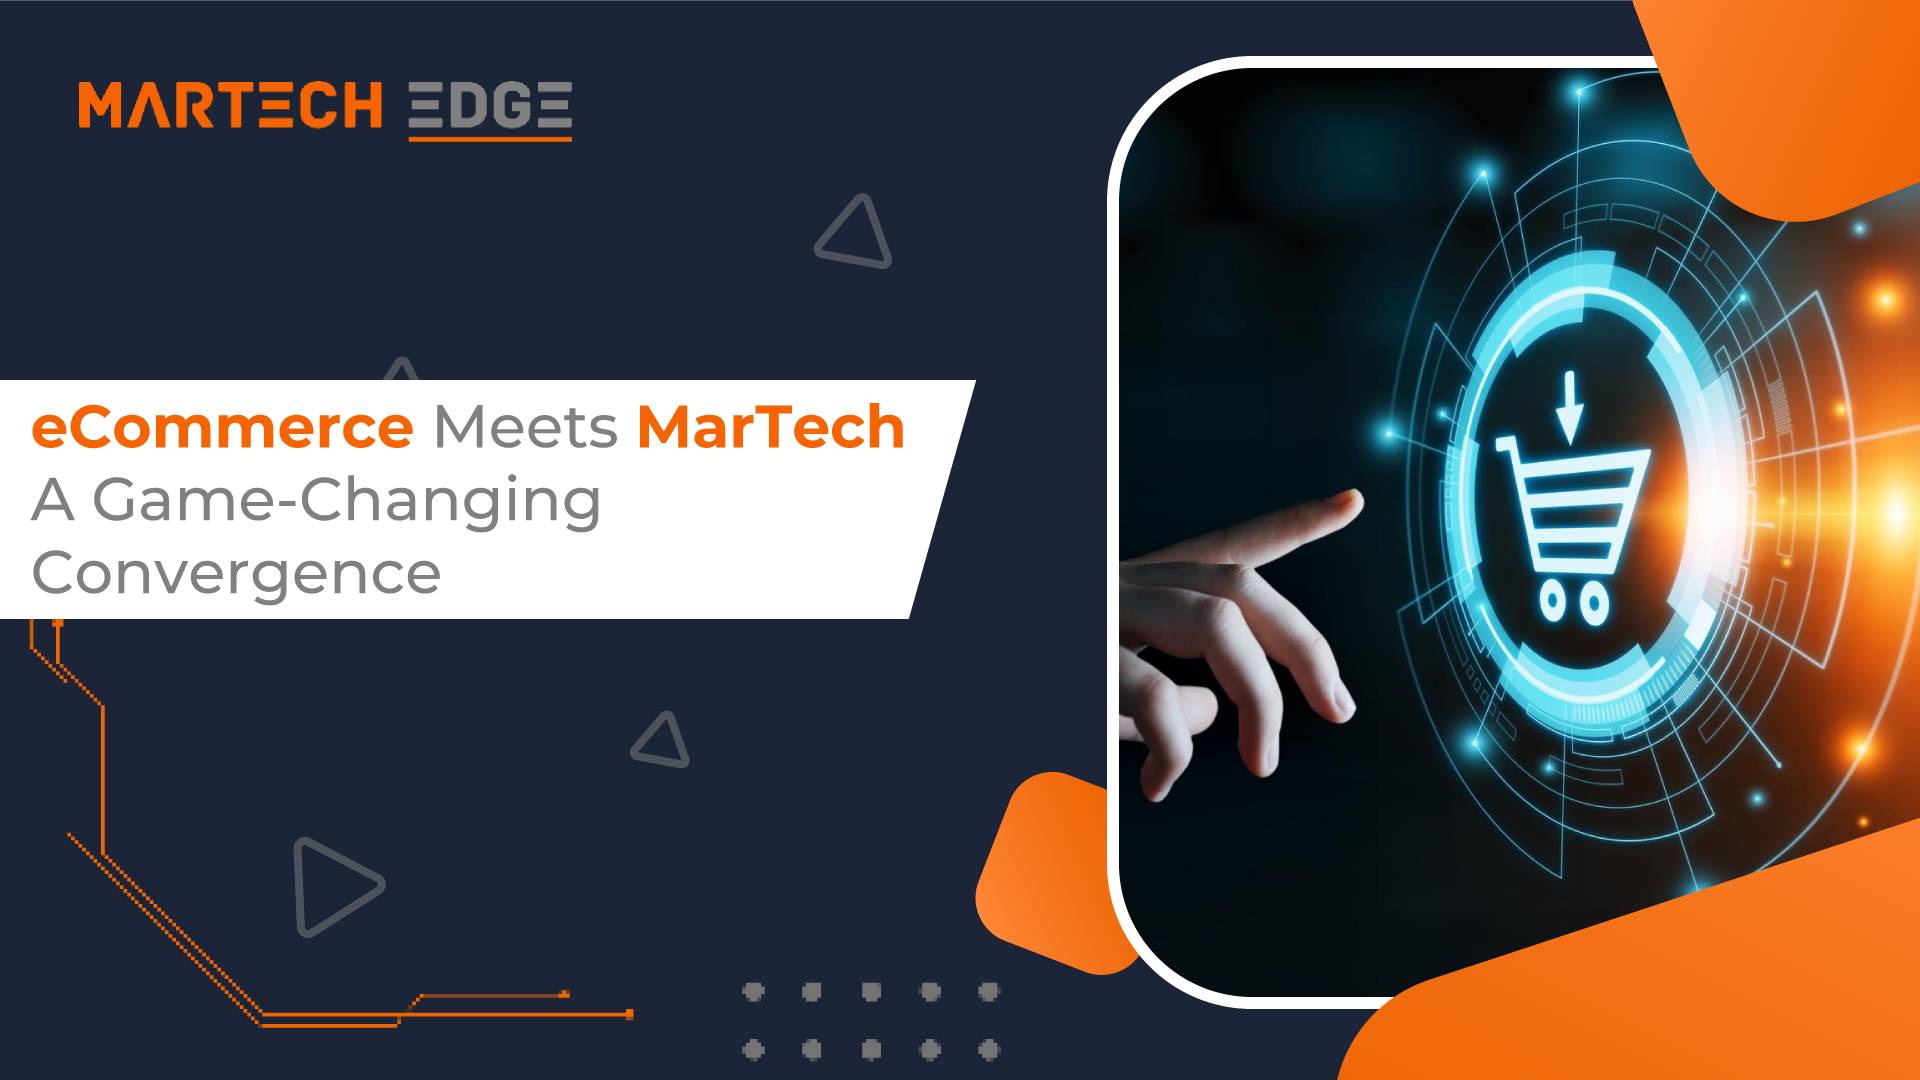 eCommerce Meets MarTech: A Game-Changing Convergence